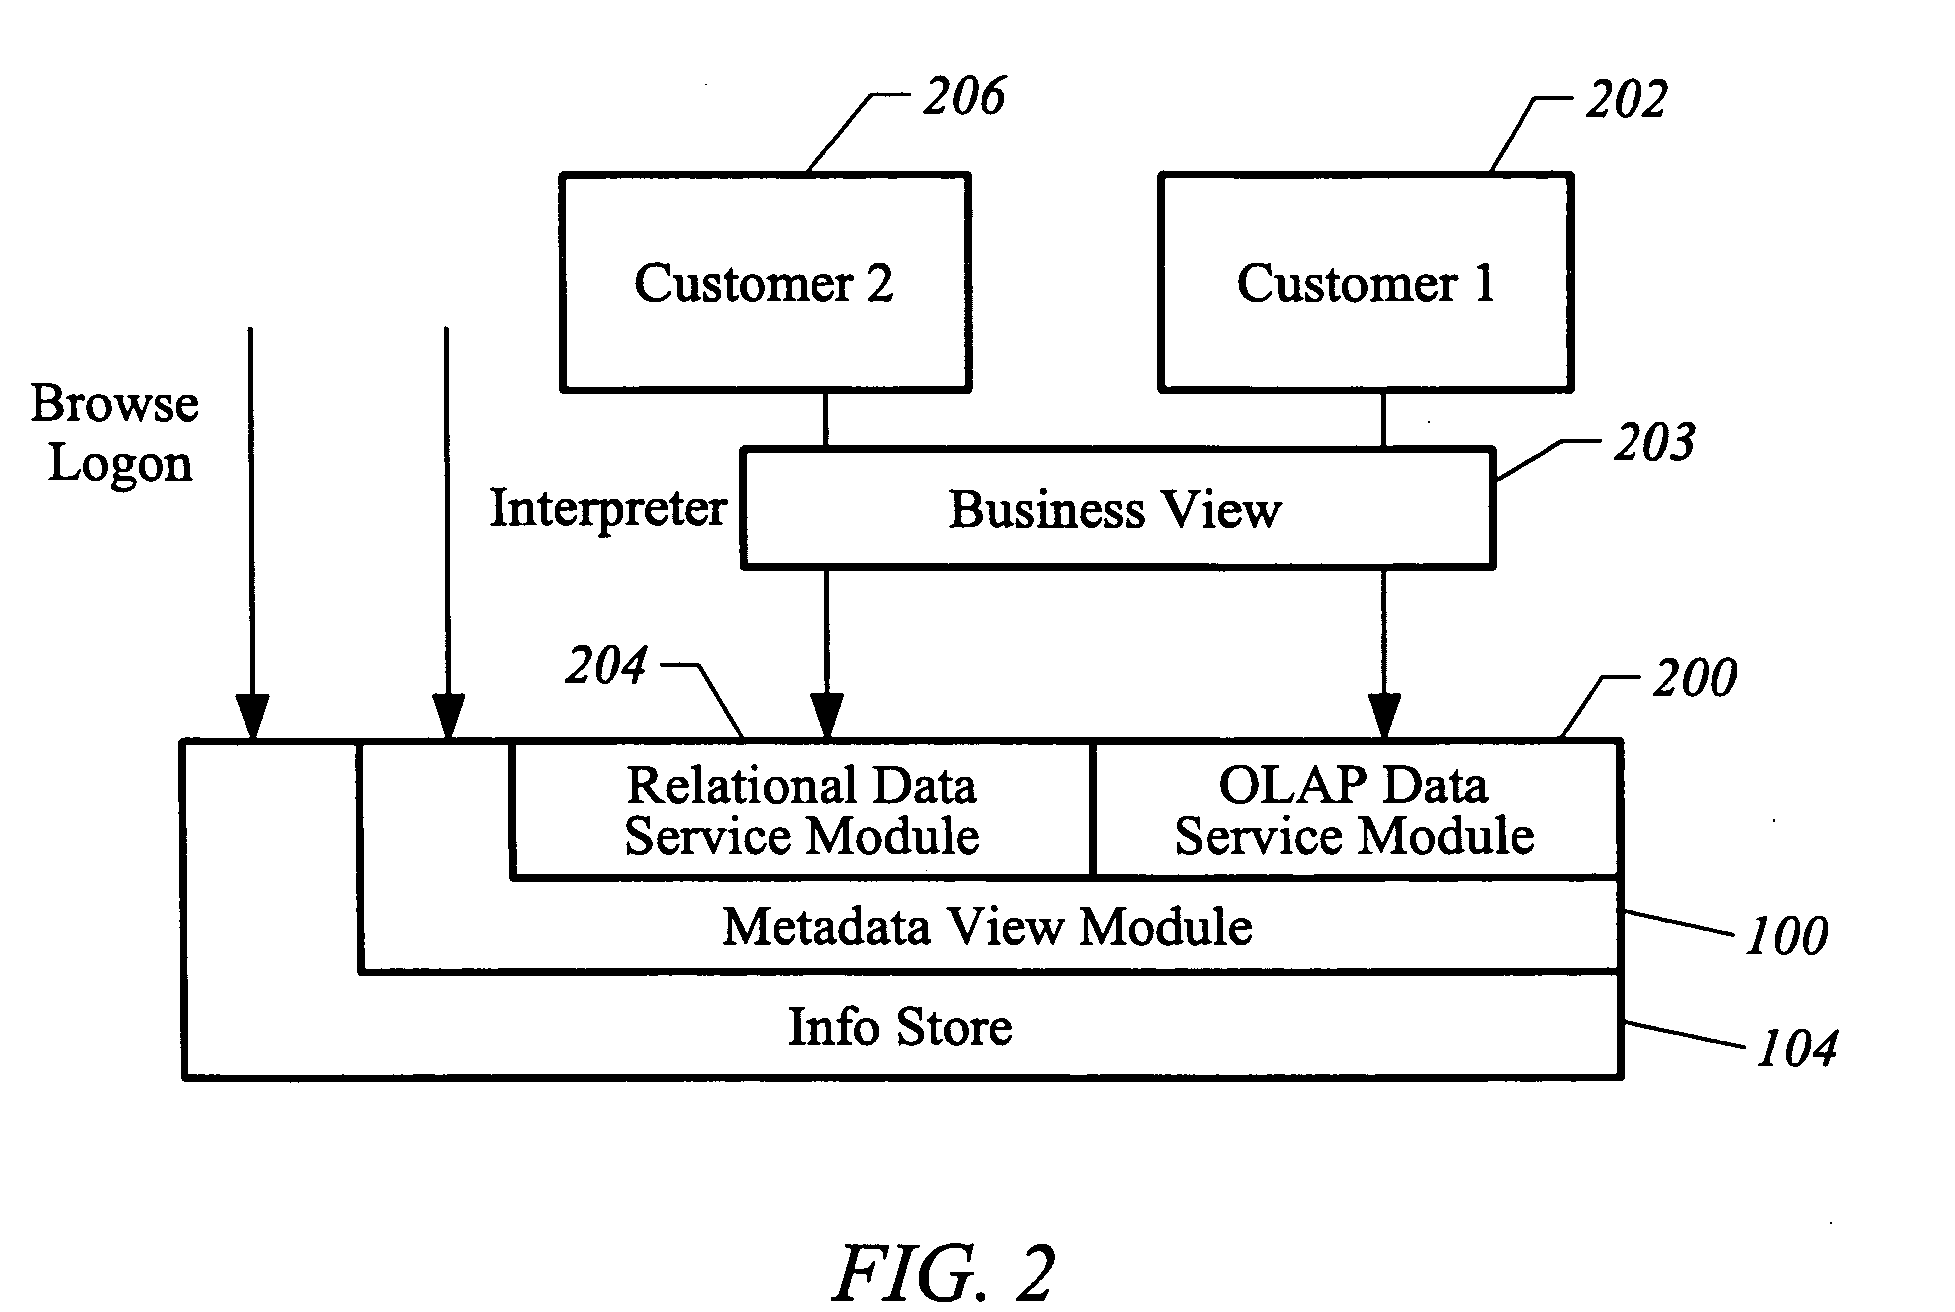 Apparatus and method for accessing diverse native data sources through a metadata interface